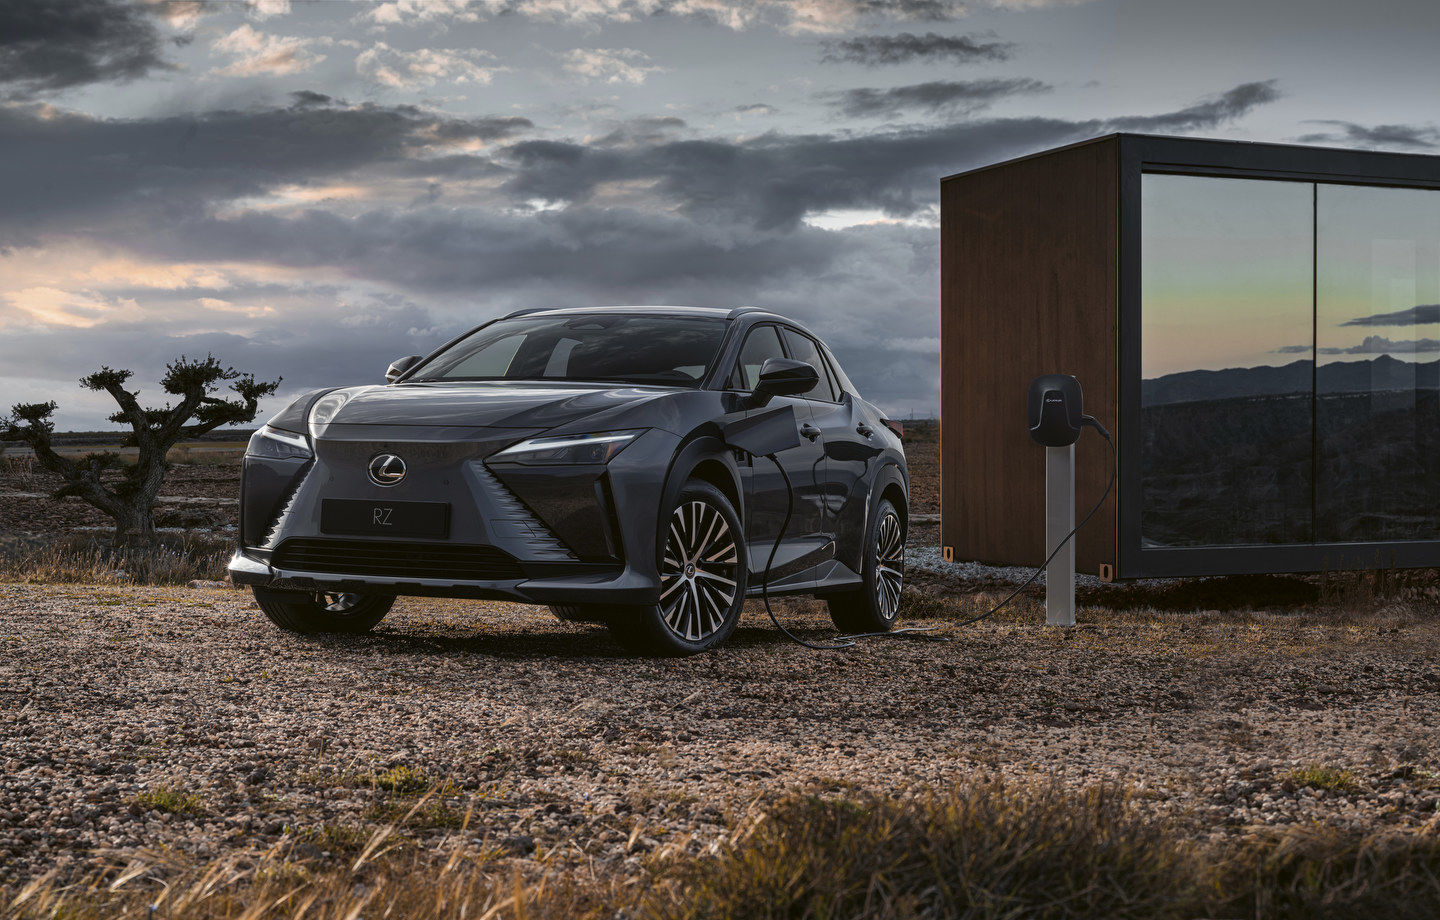 New Lexus RZ Crossover is first electric luxury crossover from Lexus